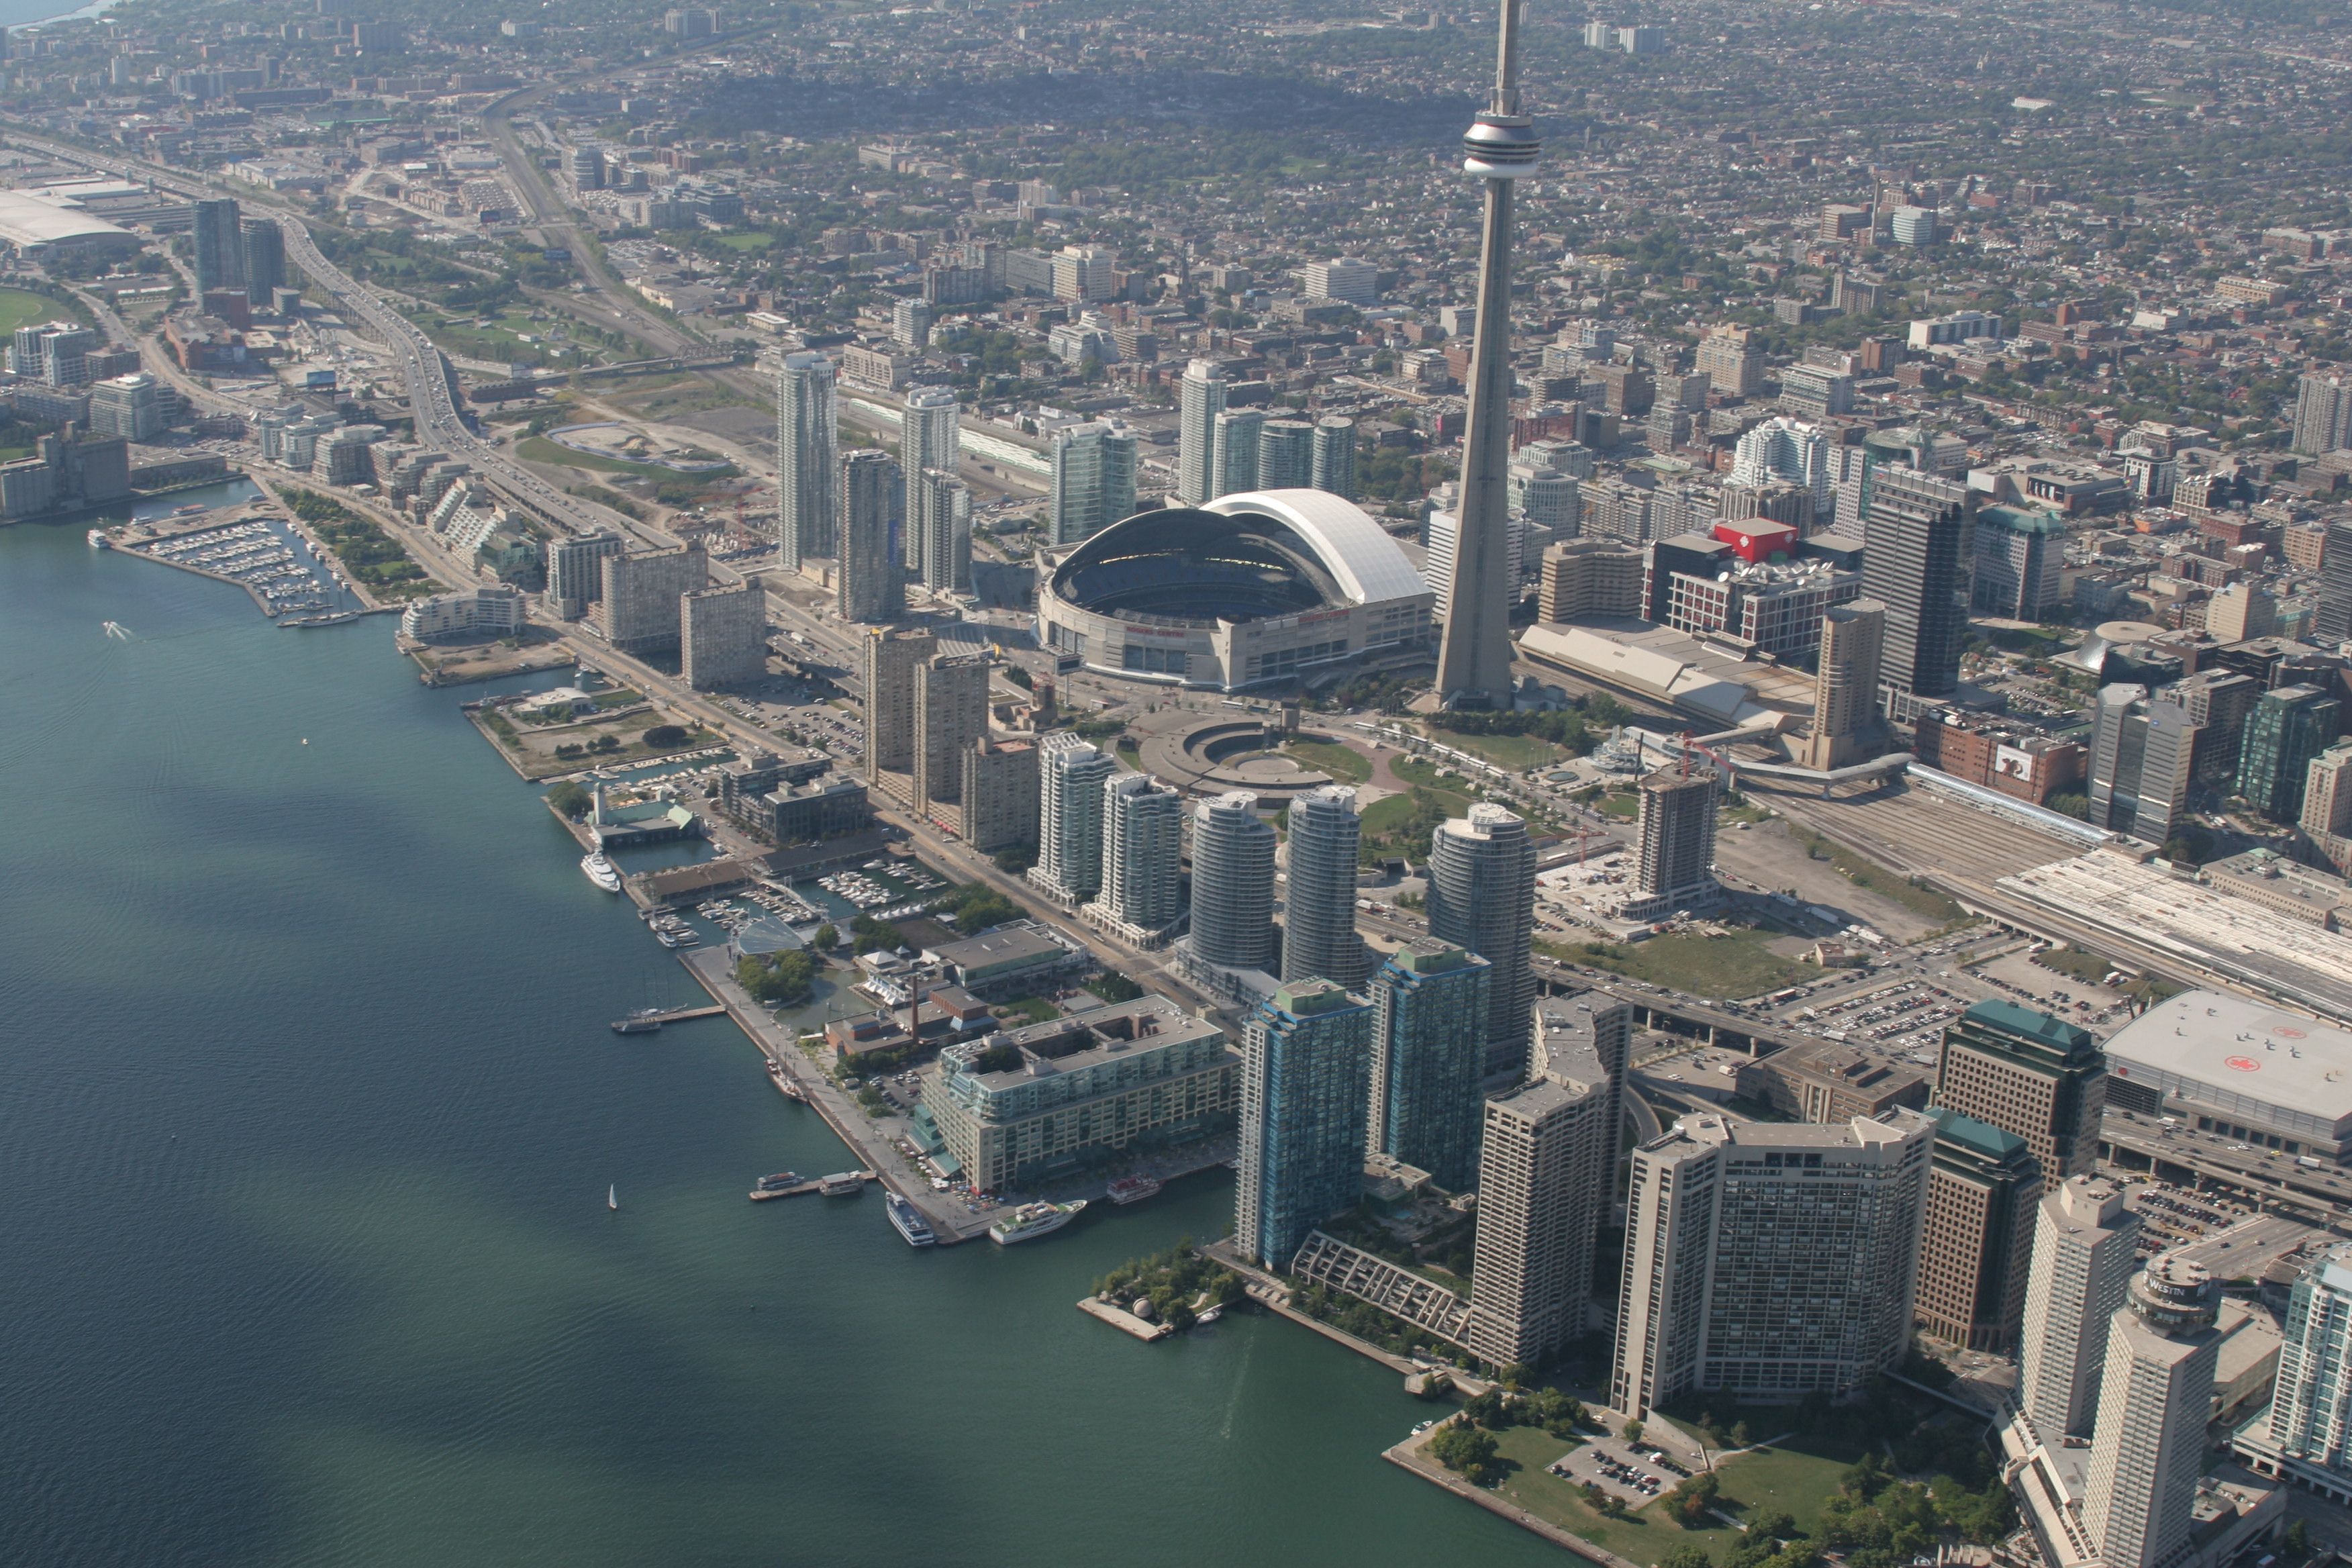 aerial view of Toronto's waterfront taken in the early 2000s